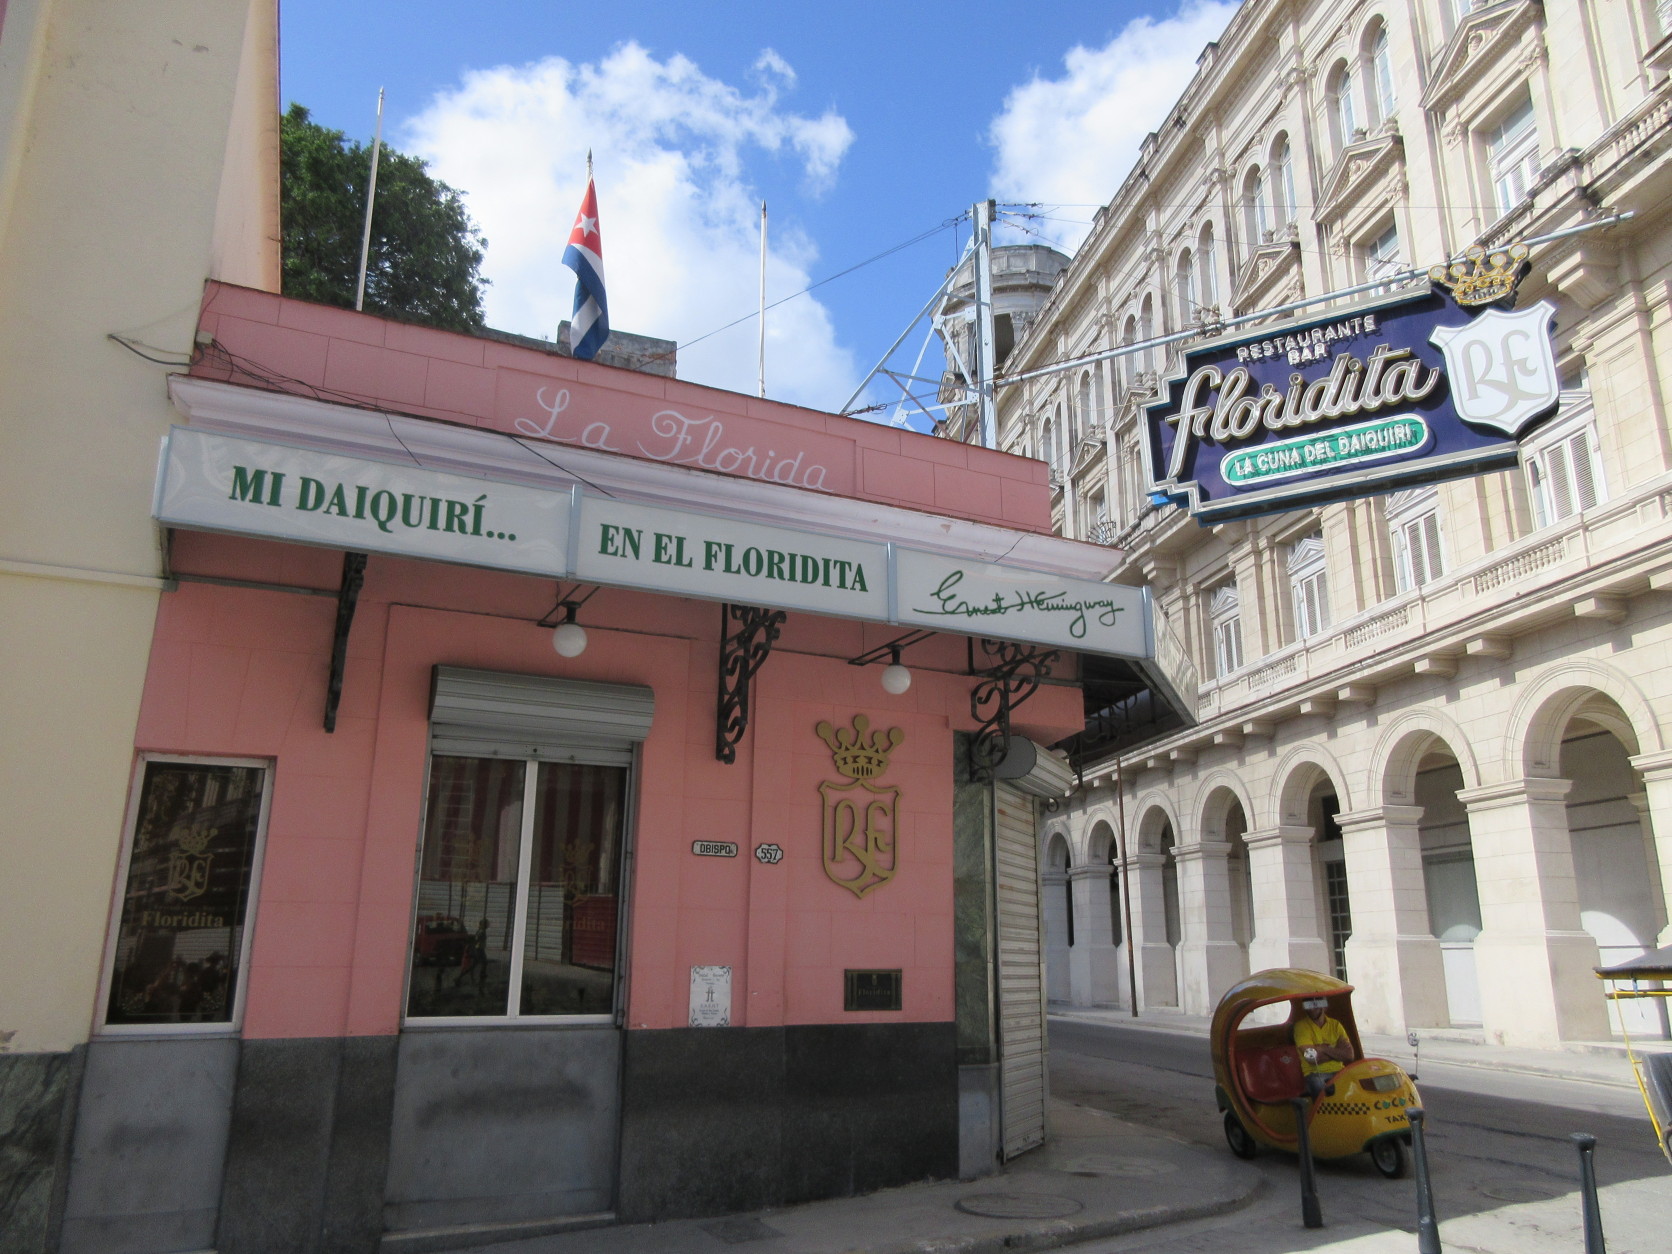 This May 16, 2015 photo shows the exterior of El Floridita, a bar and restaurant frequented by Ernest Hemingway that's a popular stop for tourists in Old Havana, Cuba. The local great air-conditioning, icy daiquiris and a bust of Hemingway, perfect for selfies. (AP Photo/Beth J. Harpaz)